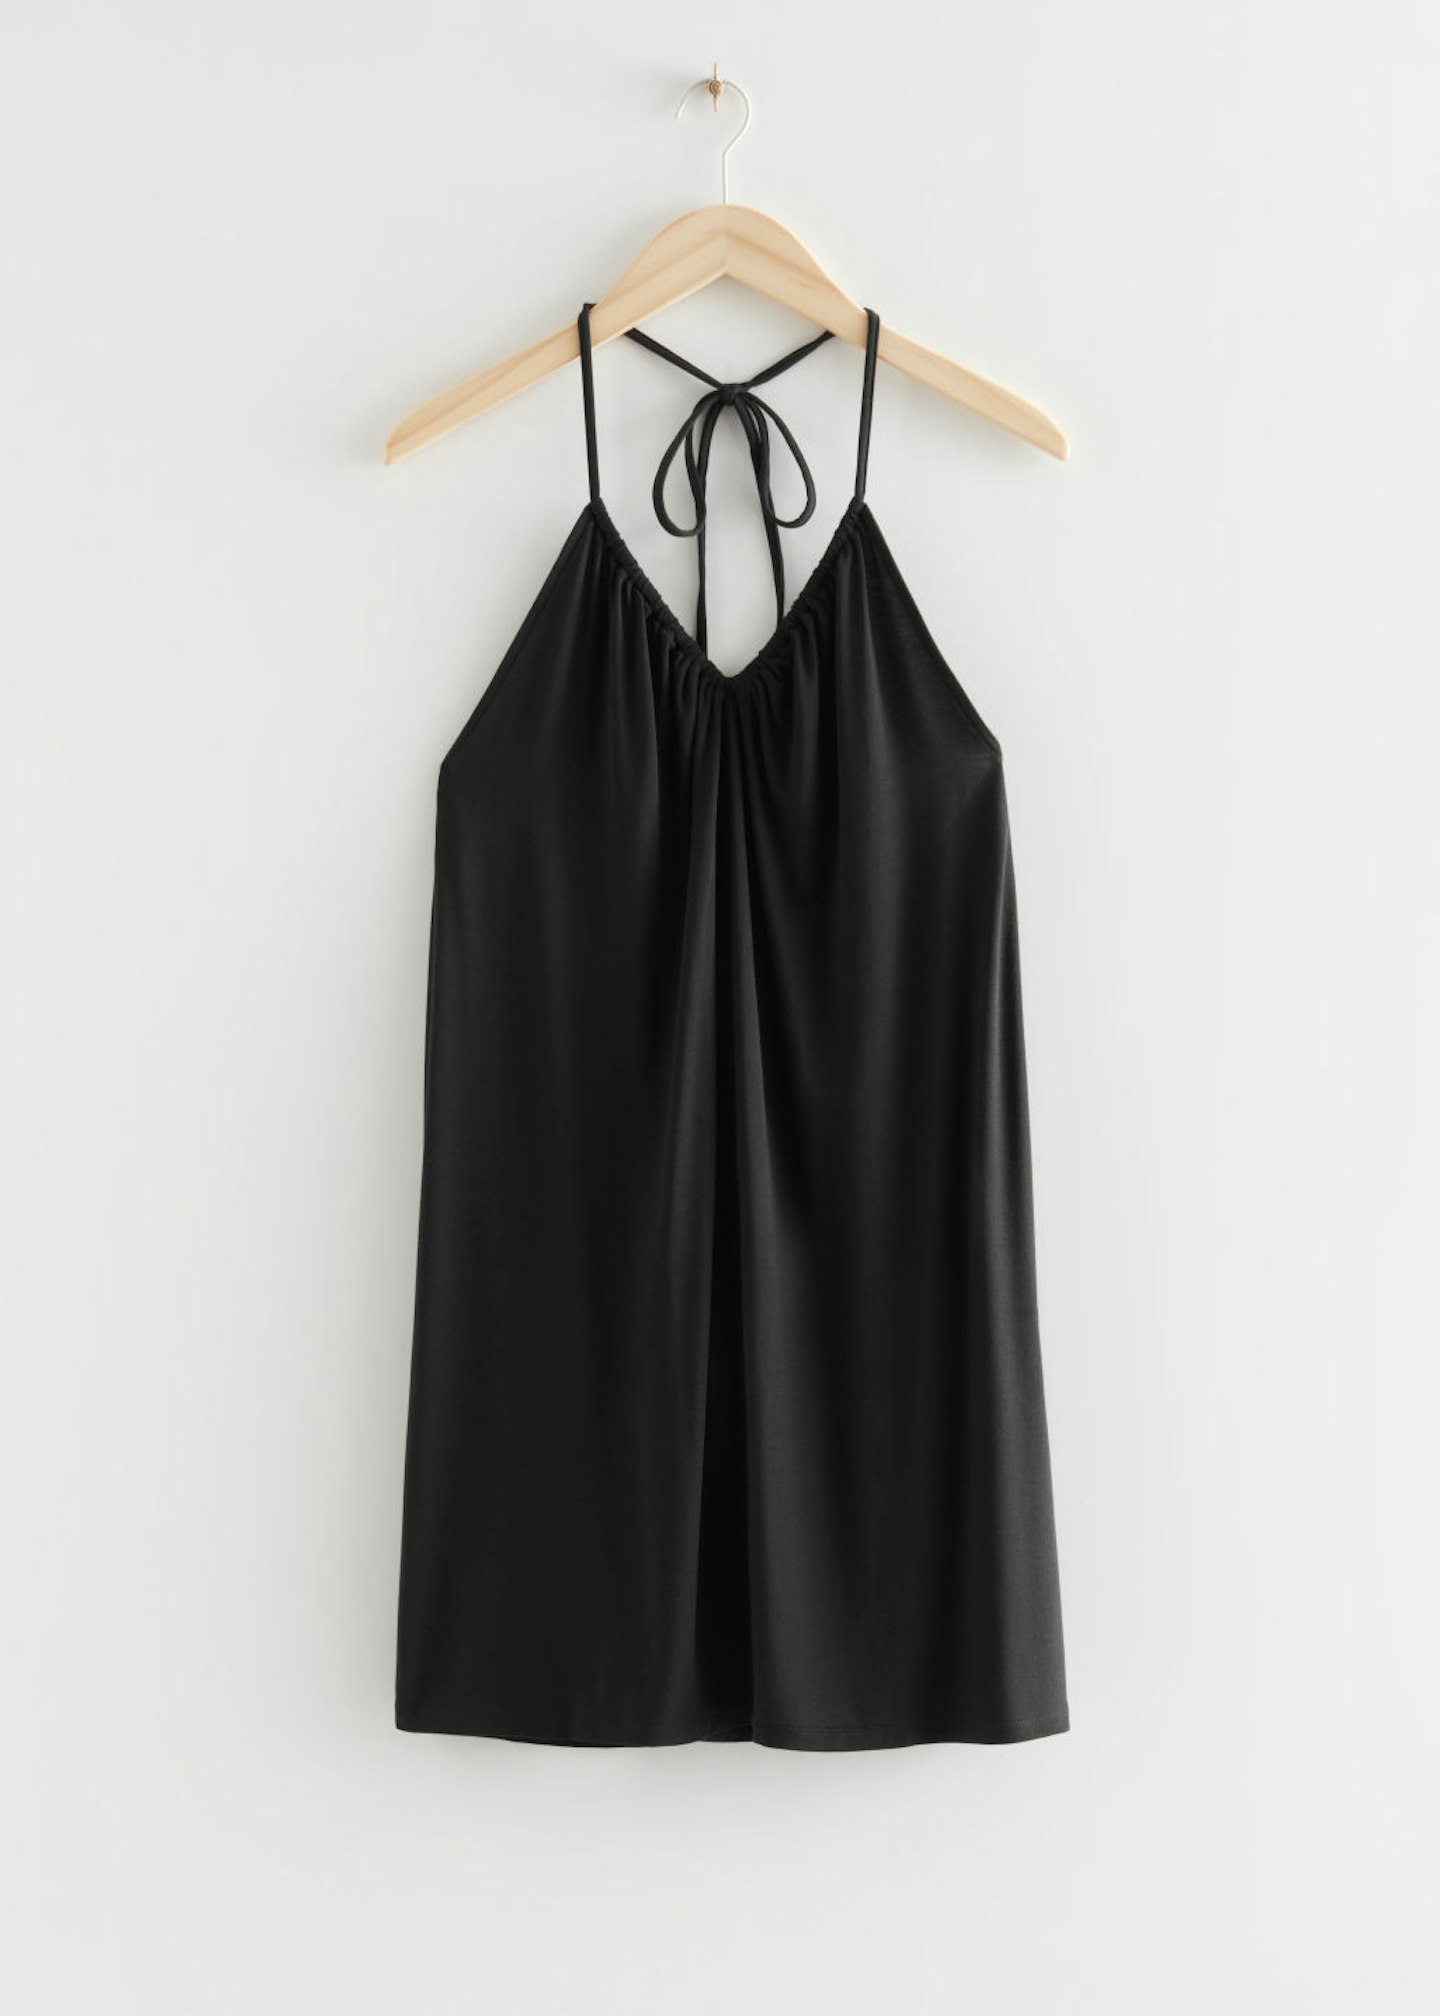 & Other Stories, Strappy Halter Mini Dress